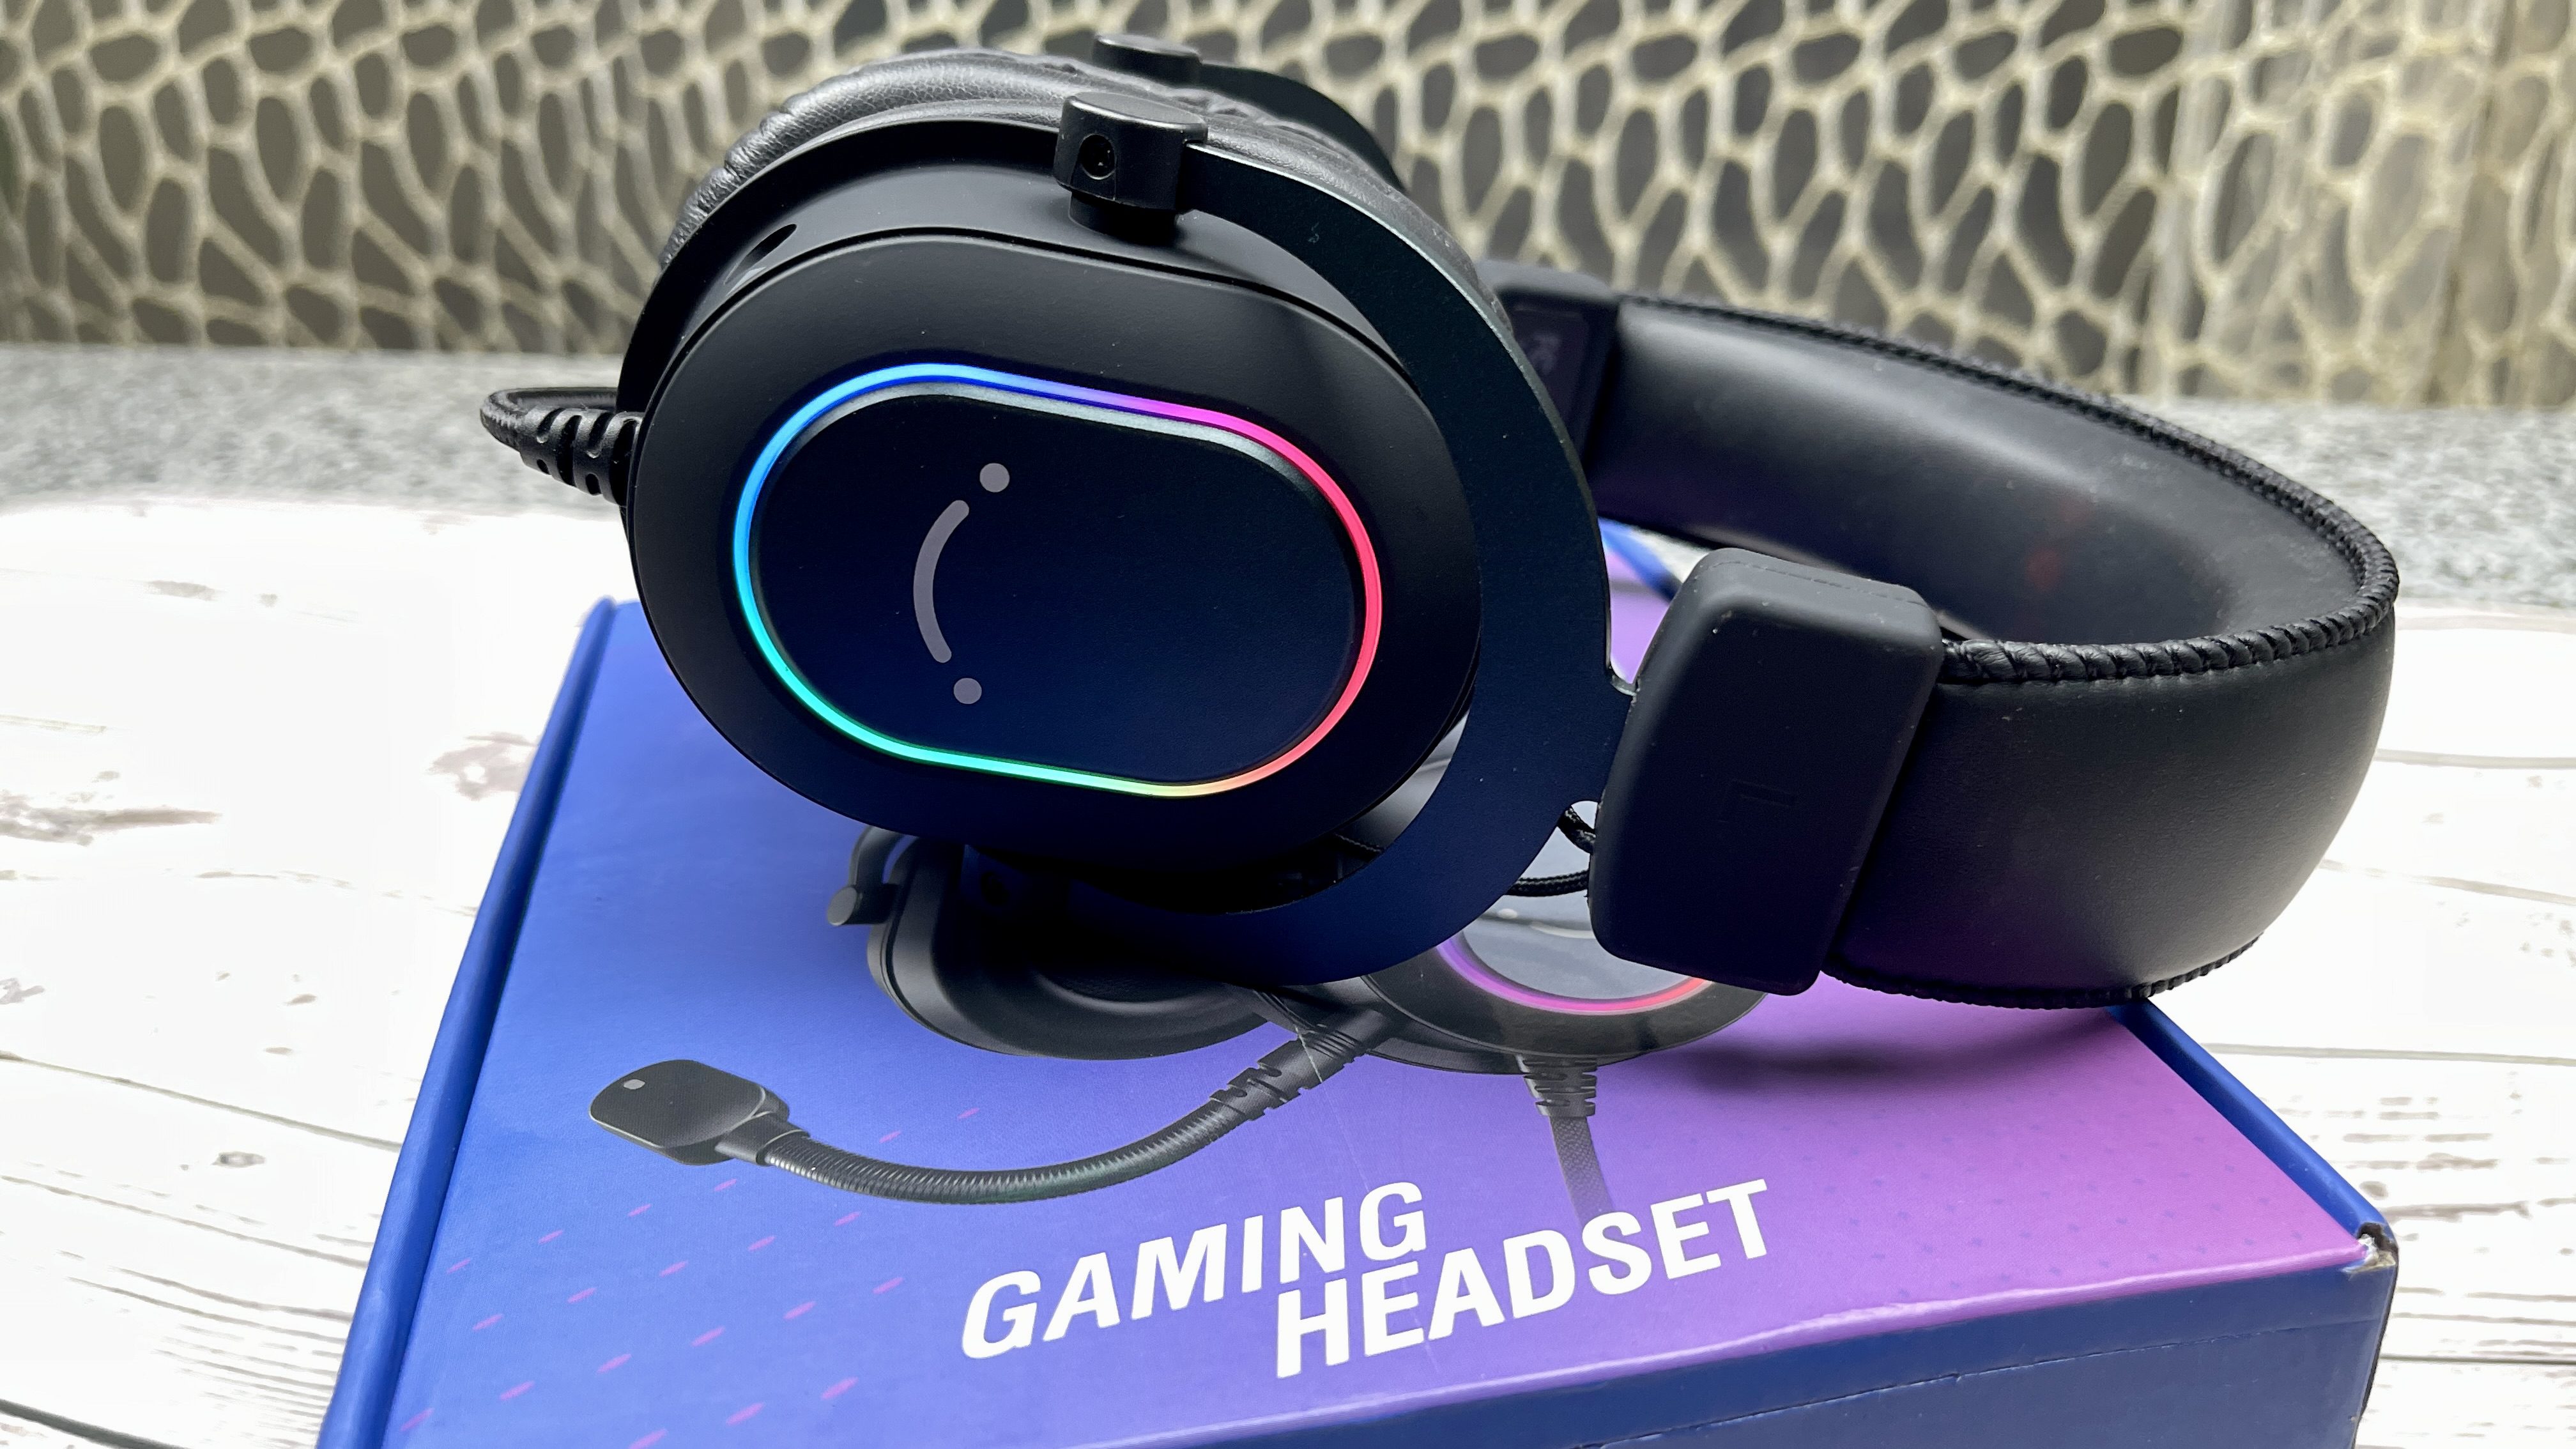 Fifine H6 AmpliGame Review A Budget Gaming Headset with Surprising Quality